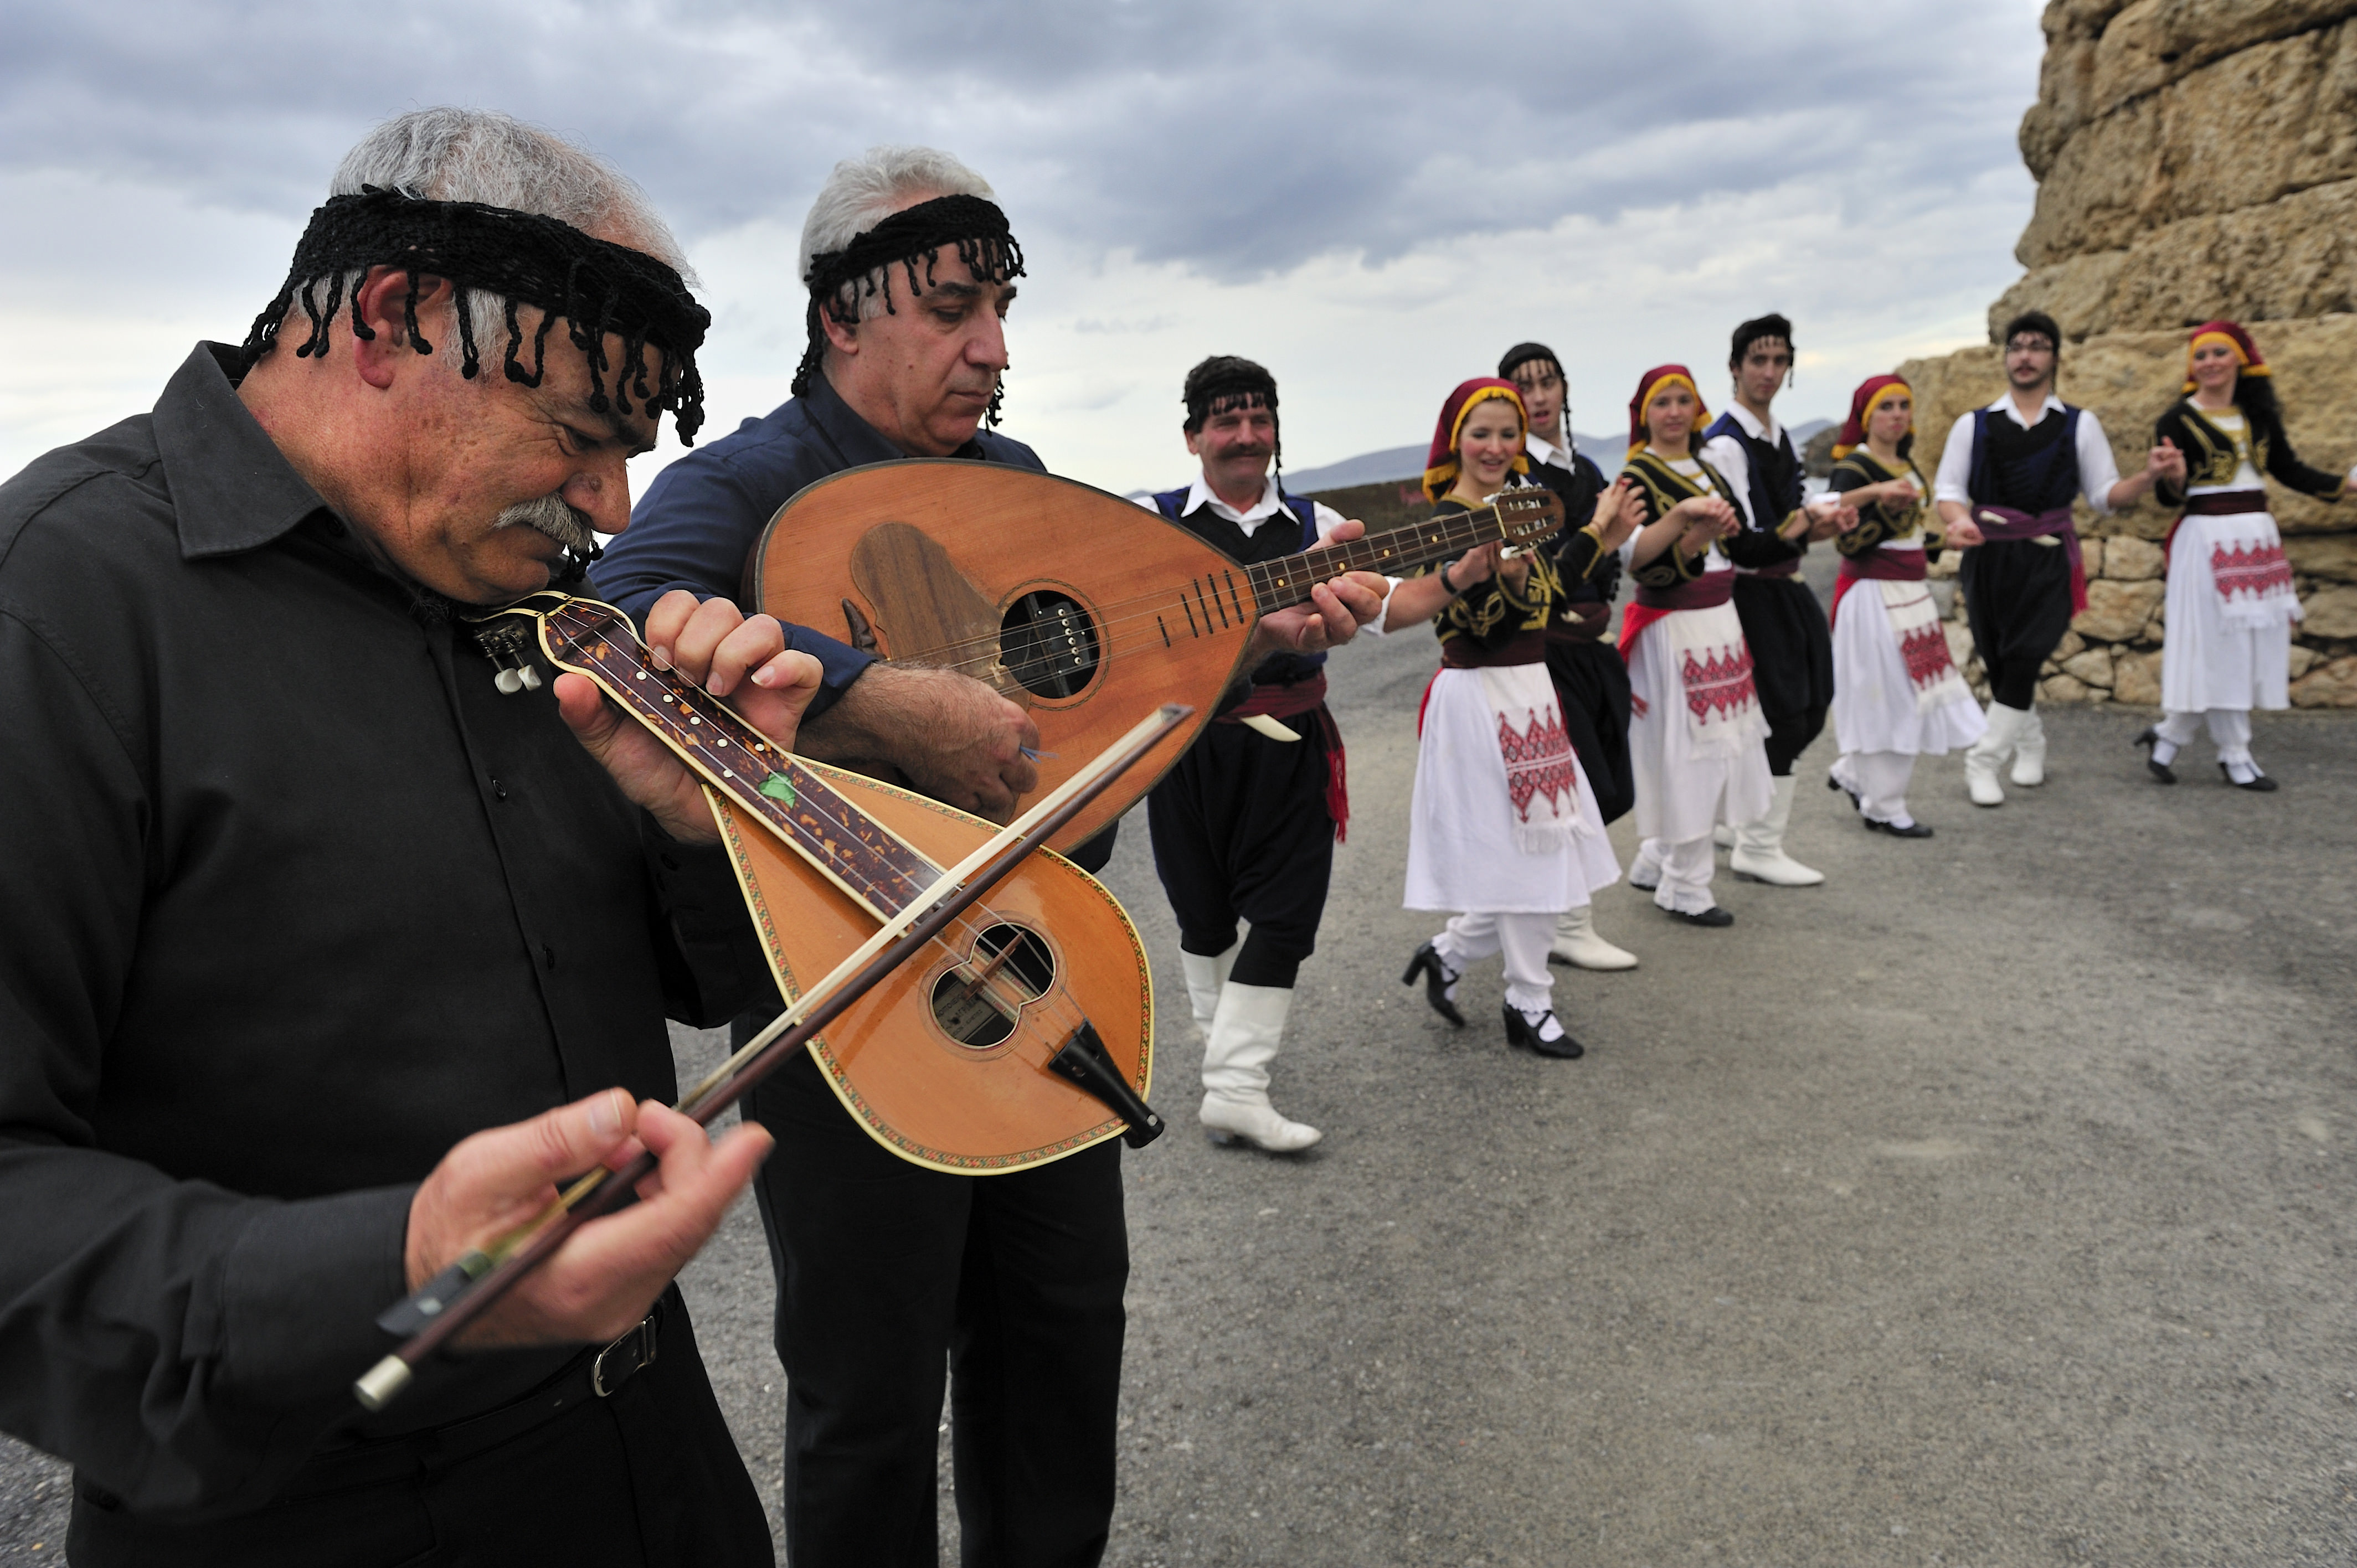 people playing traditional music and dancing